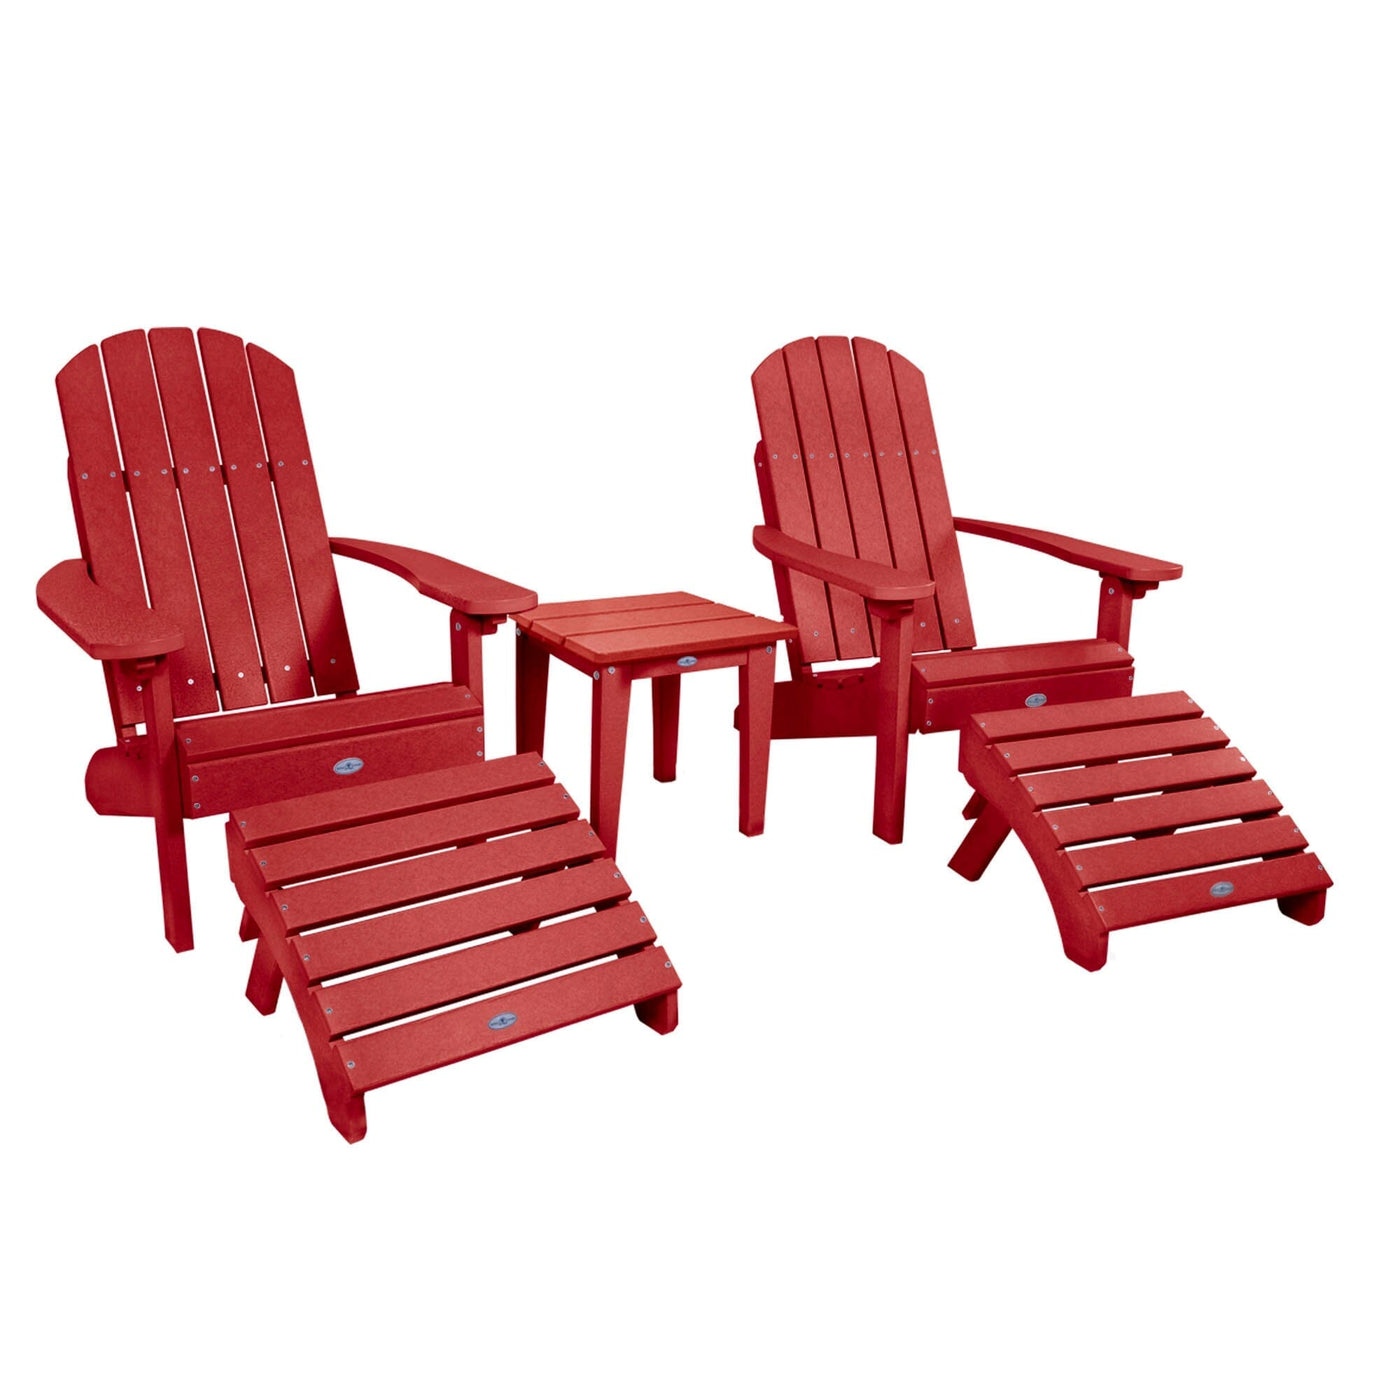 Two Cape Classic Adirondack Chairs, Side Table and Ottoman 5 pc Set Kitted Set Bahia Verde Outdoors Boathouse Red 